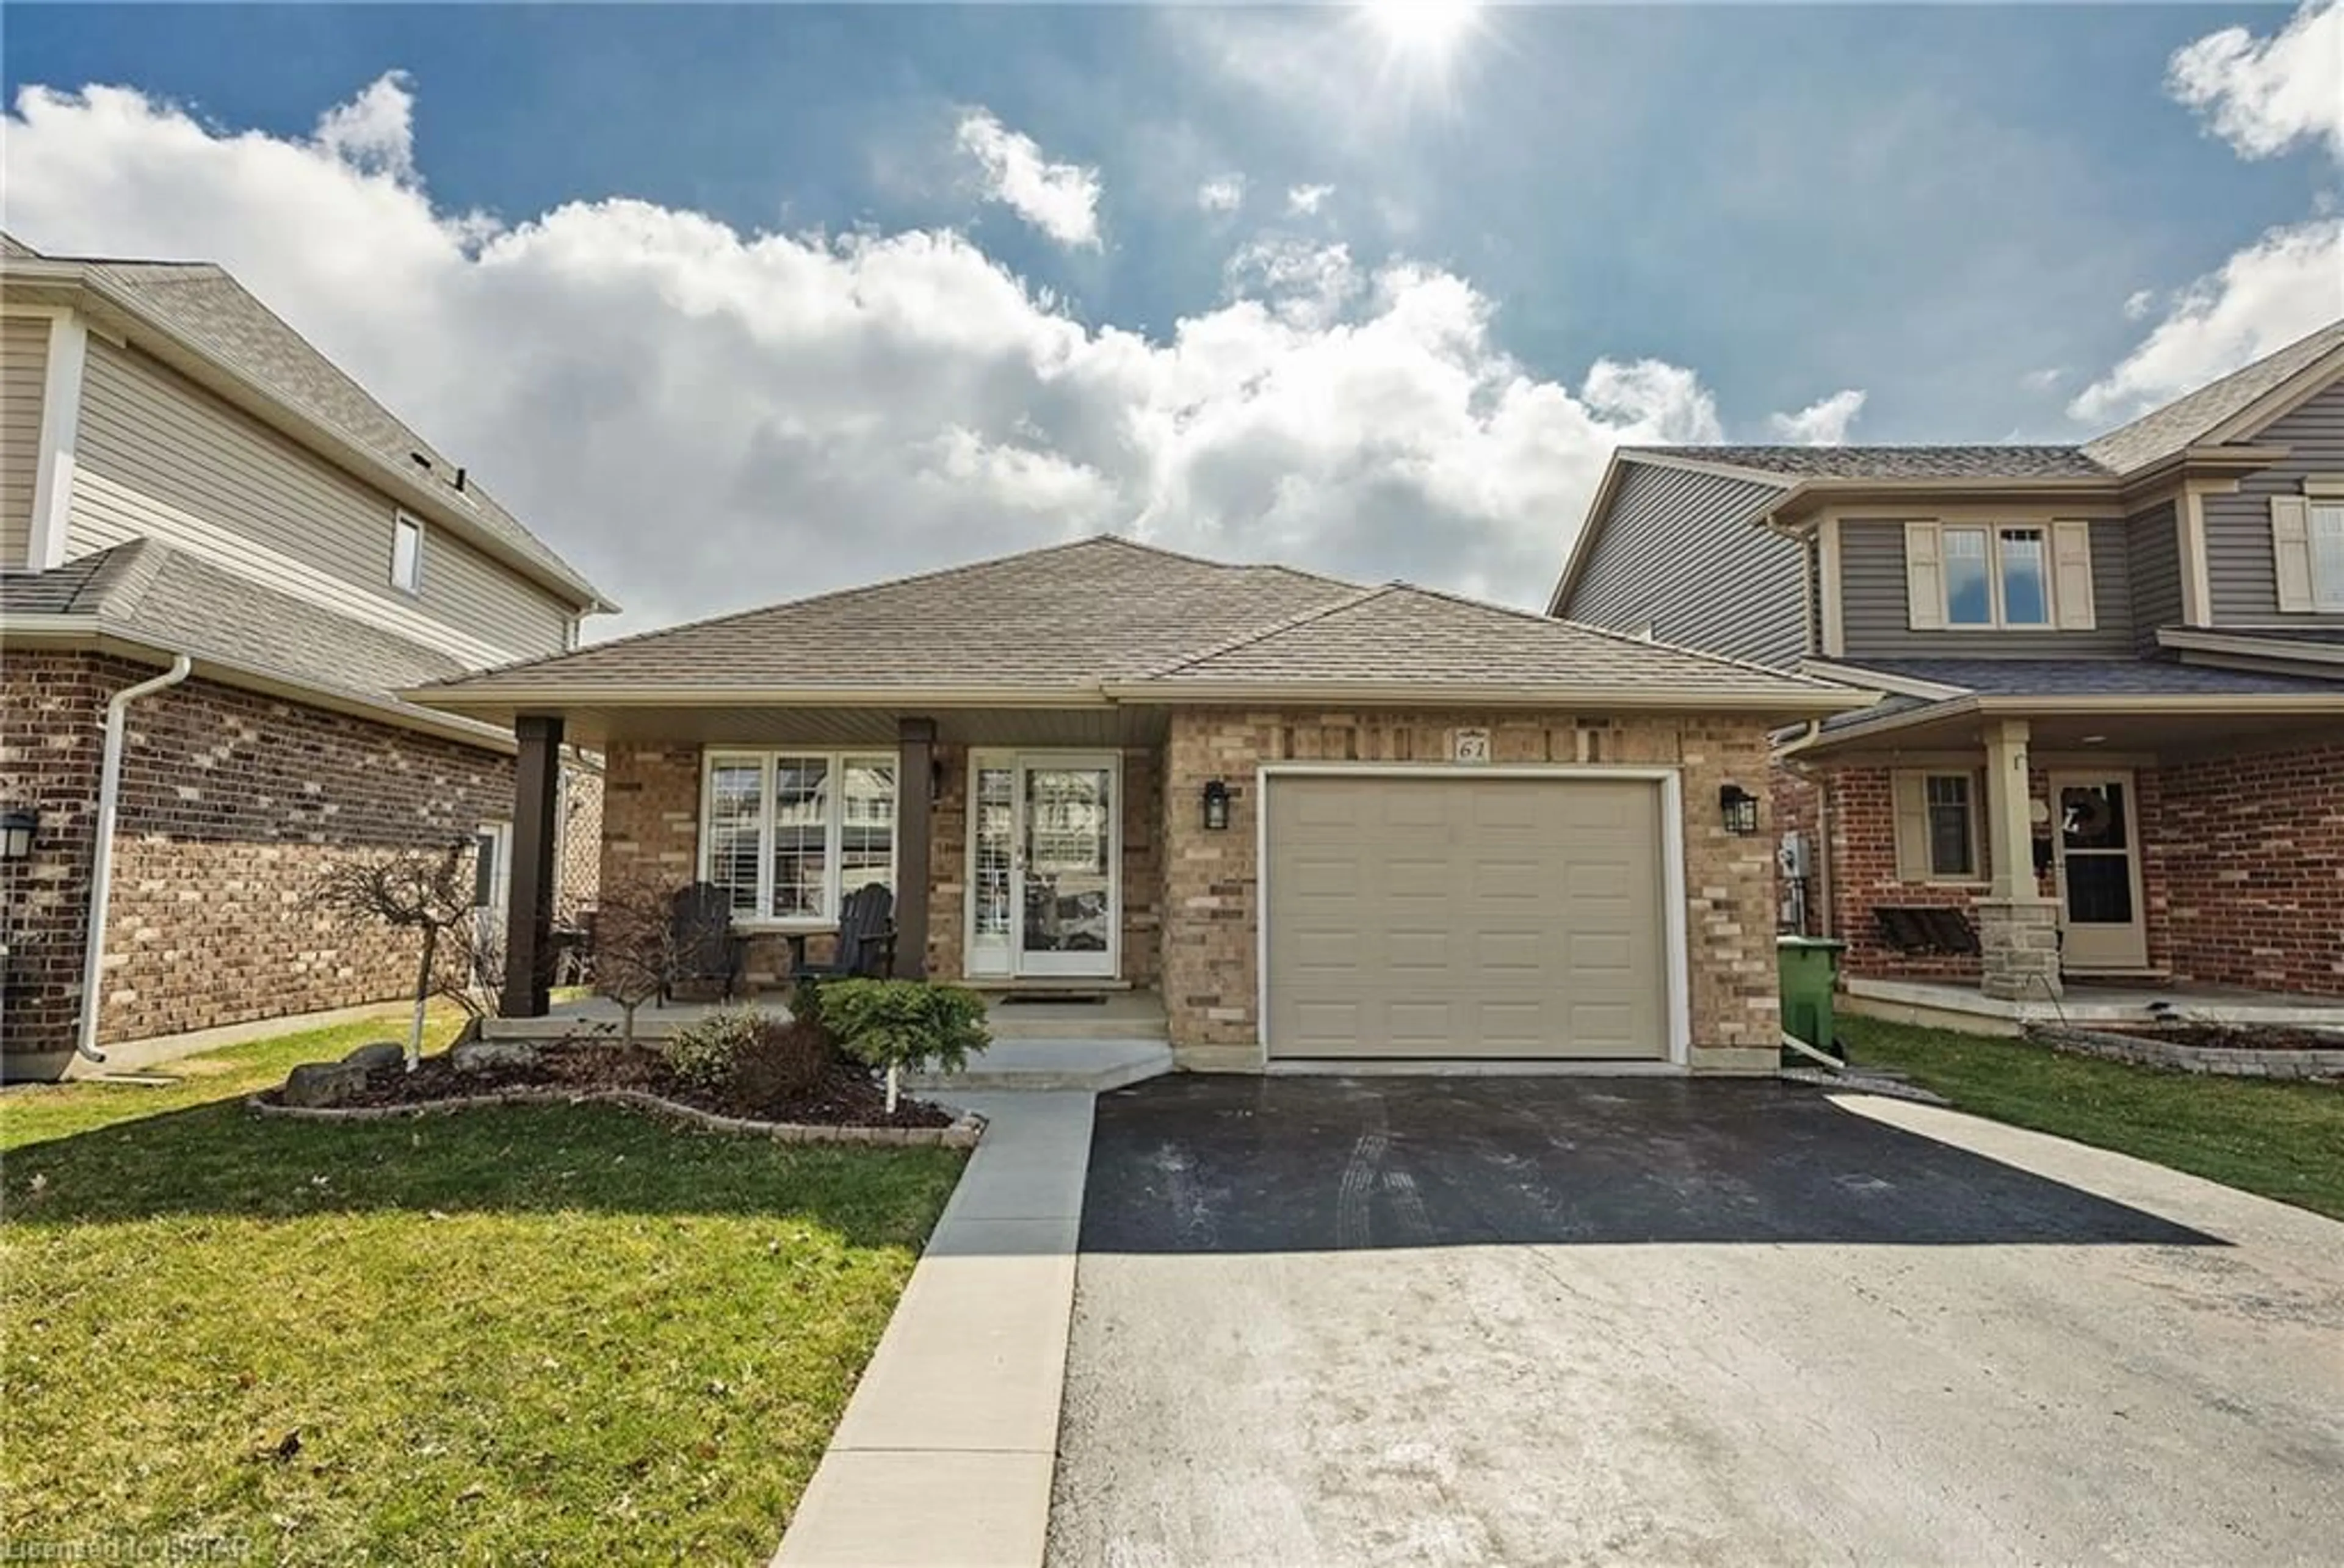 Home with brick exterior material for 61 Peach Tree Blvd, St. Thomas Ontario N5R 0C1